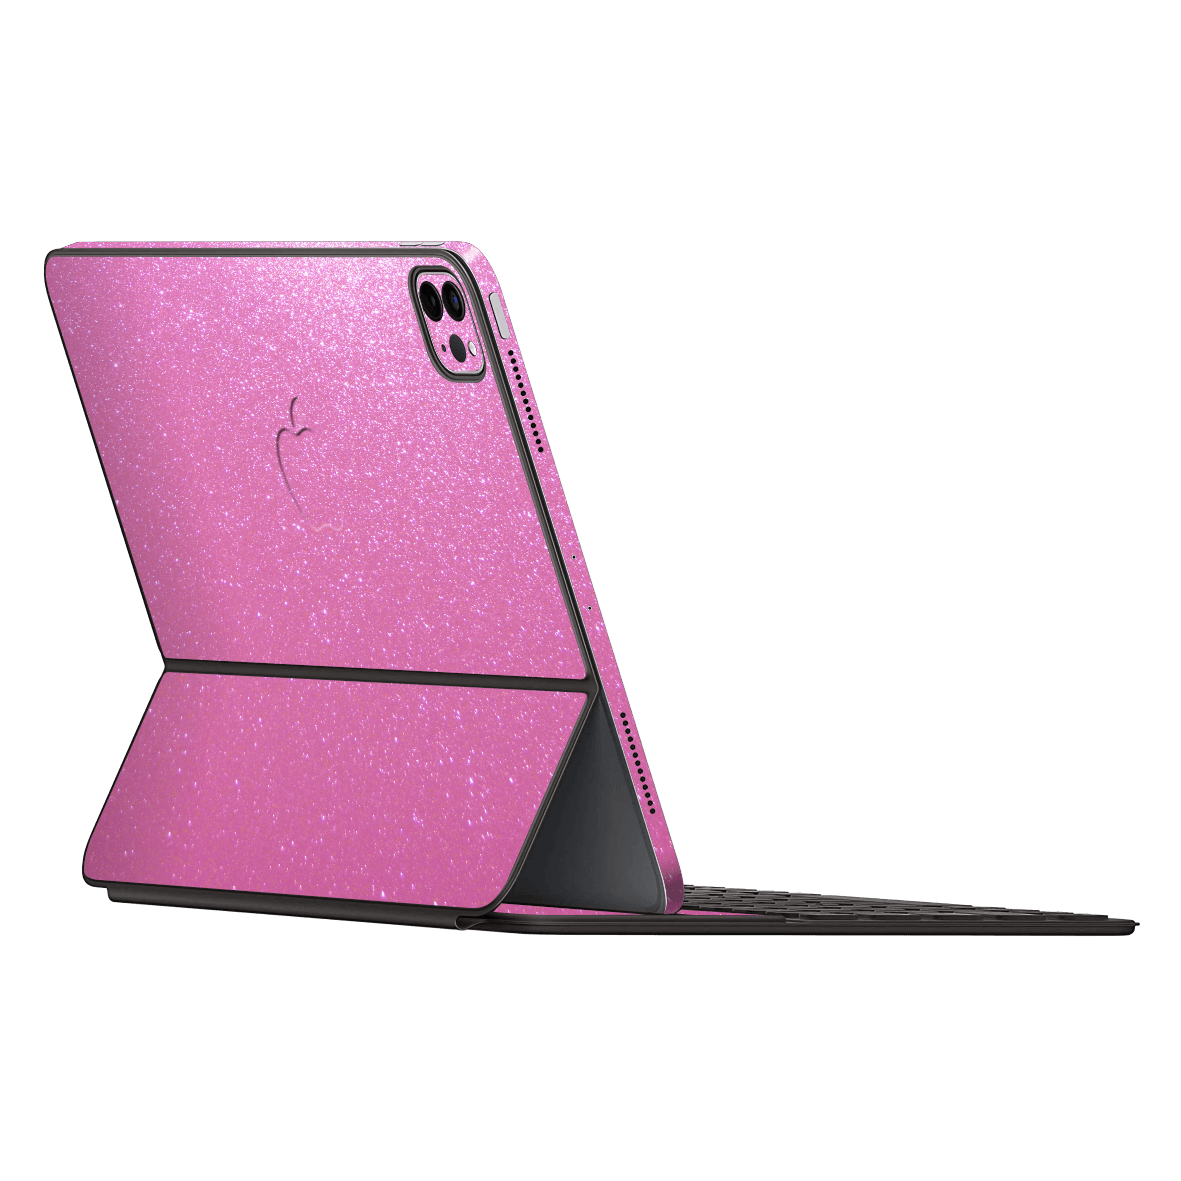 Smart Keyboard Folio for iPad Pro/Air 11” Diamond Pink Shimmering Sparkling Glitter Skin Wrap Sticker Decal Cover Protector by EasySkinz | EasySkinz.com